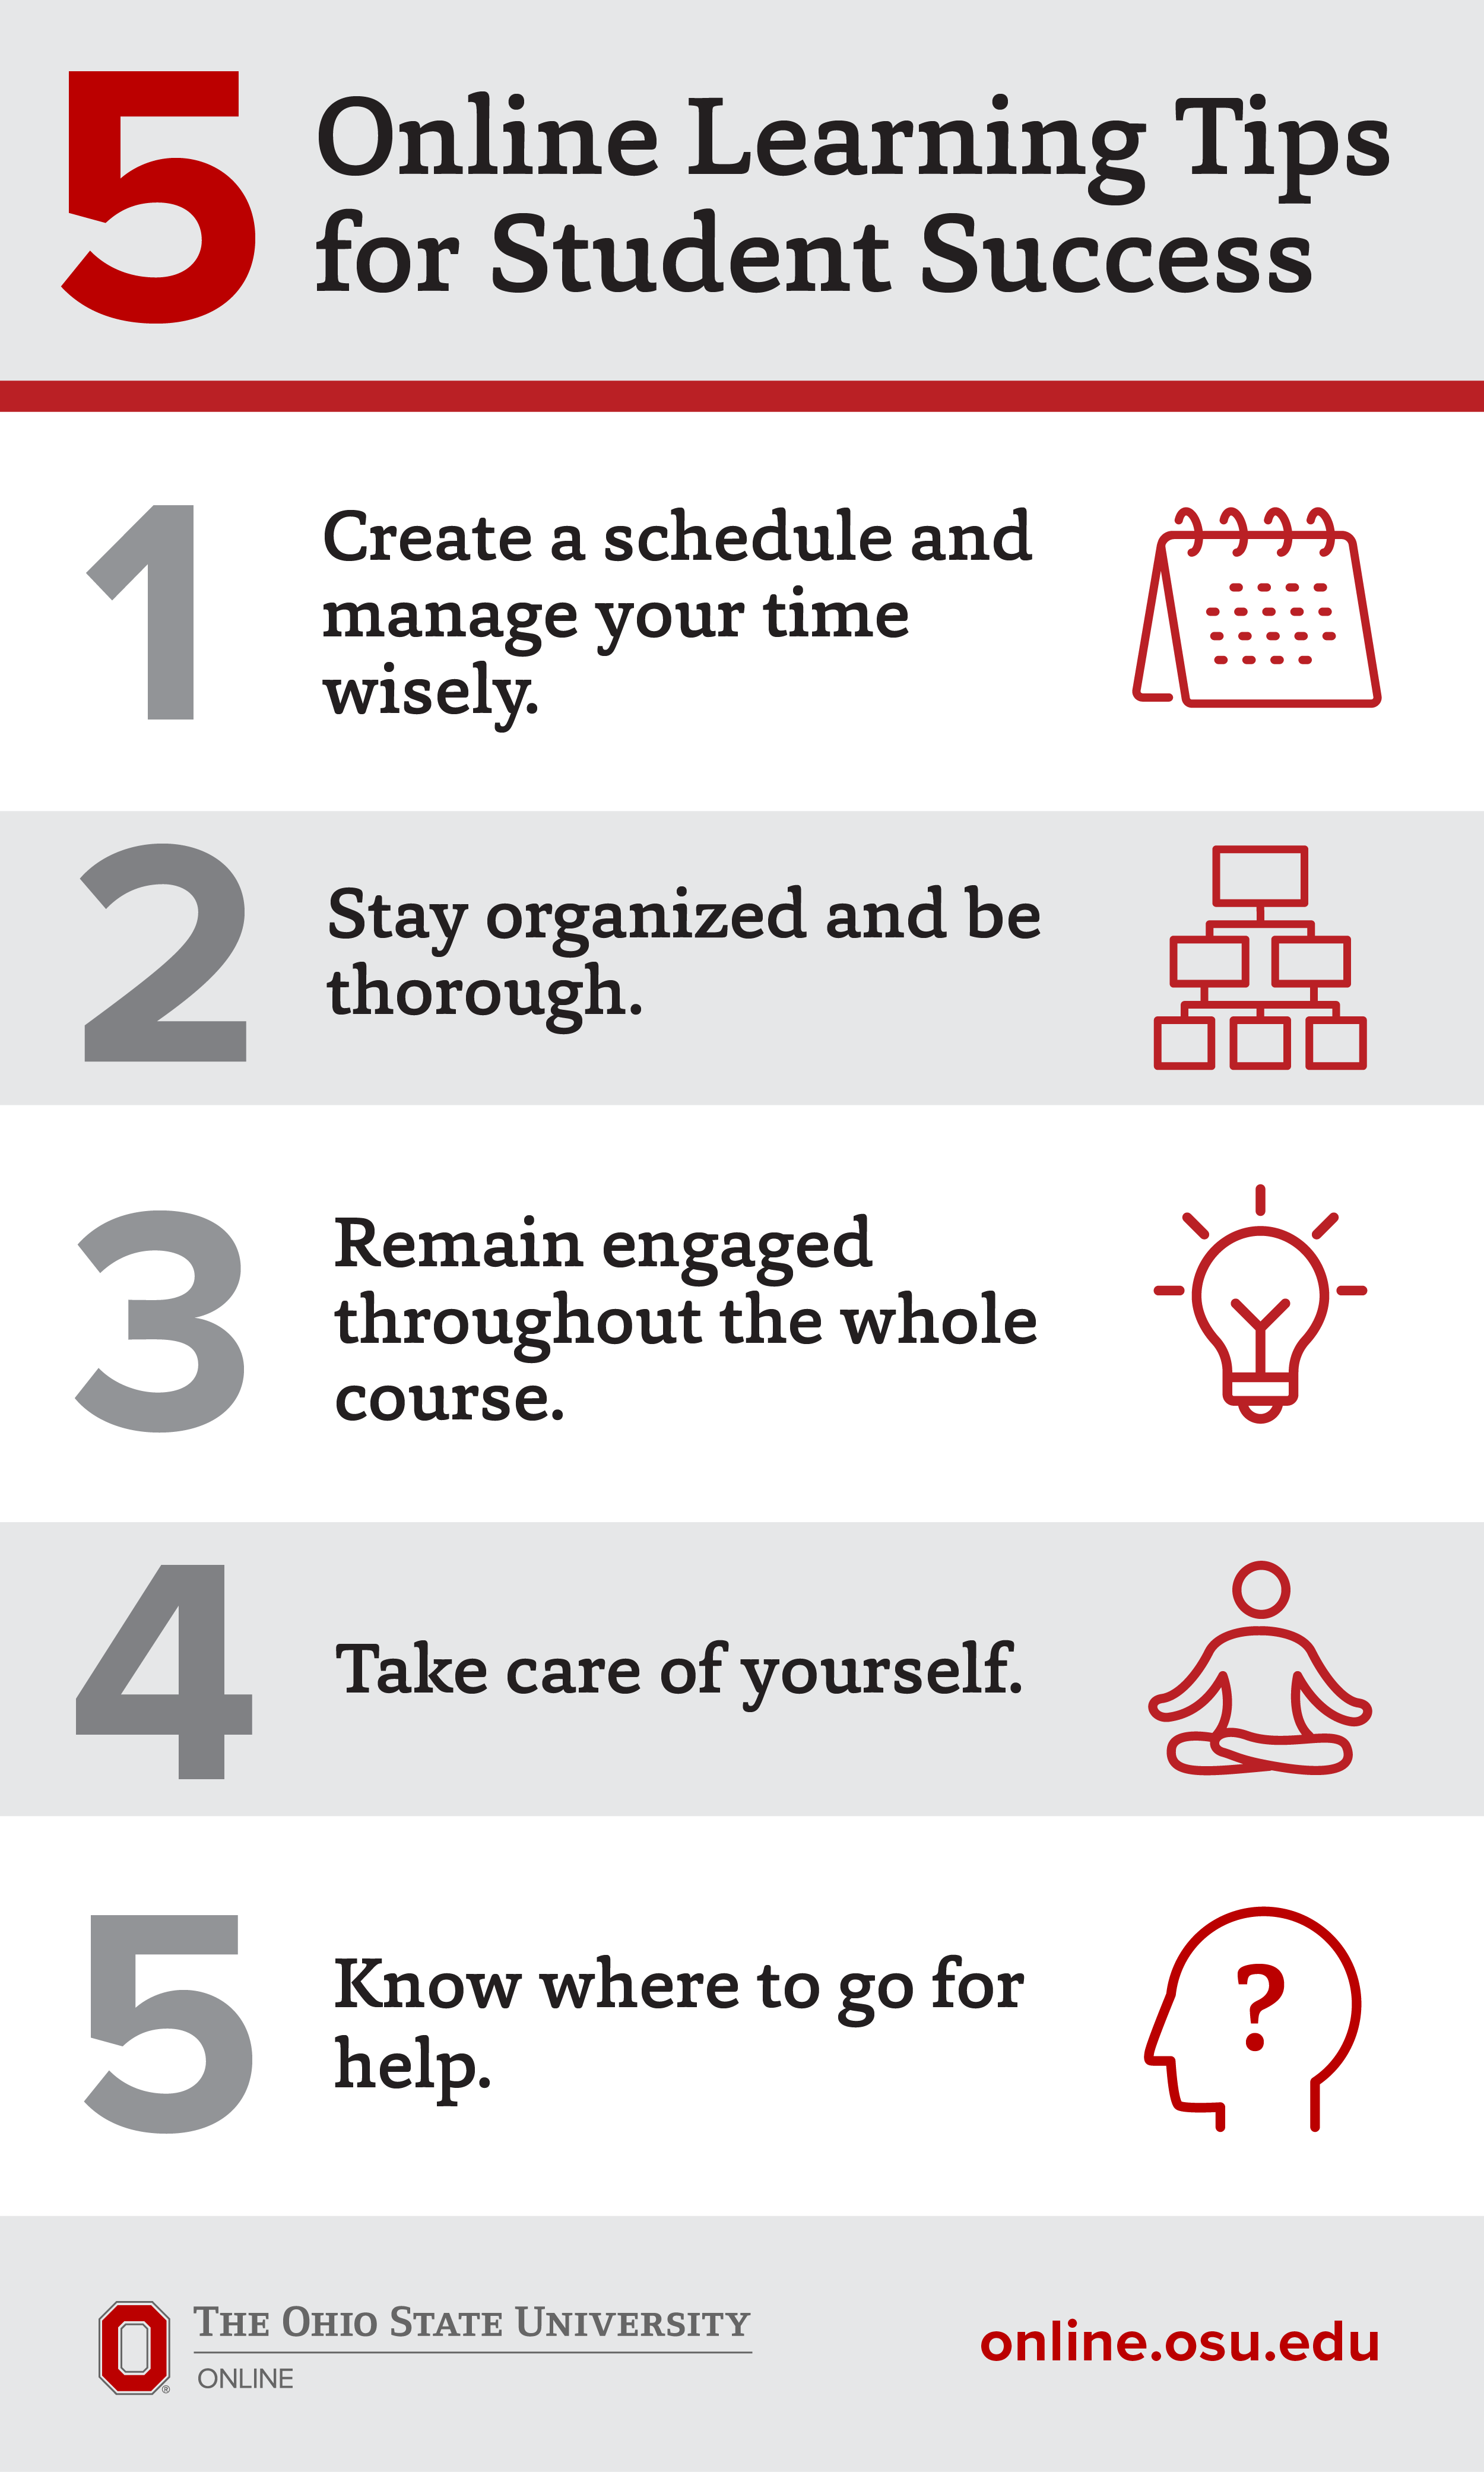 A scarlet and gray infographic shares 5 tips for online learning and methods to achieve success as an online student.